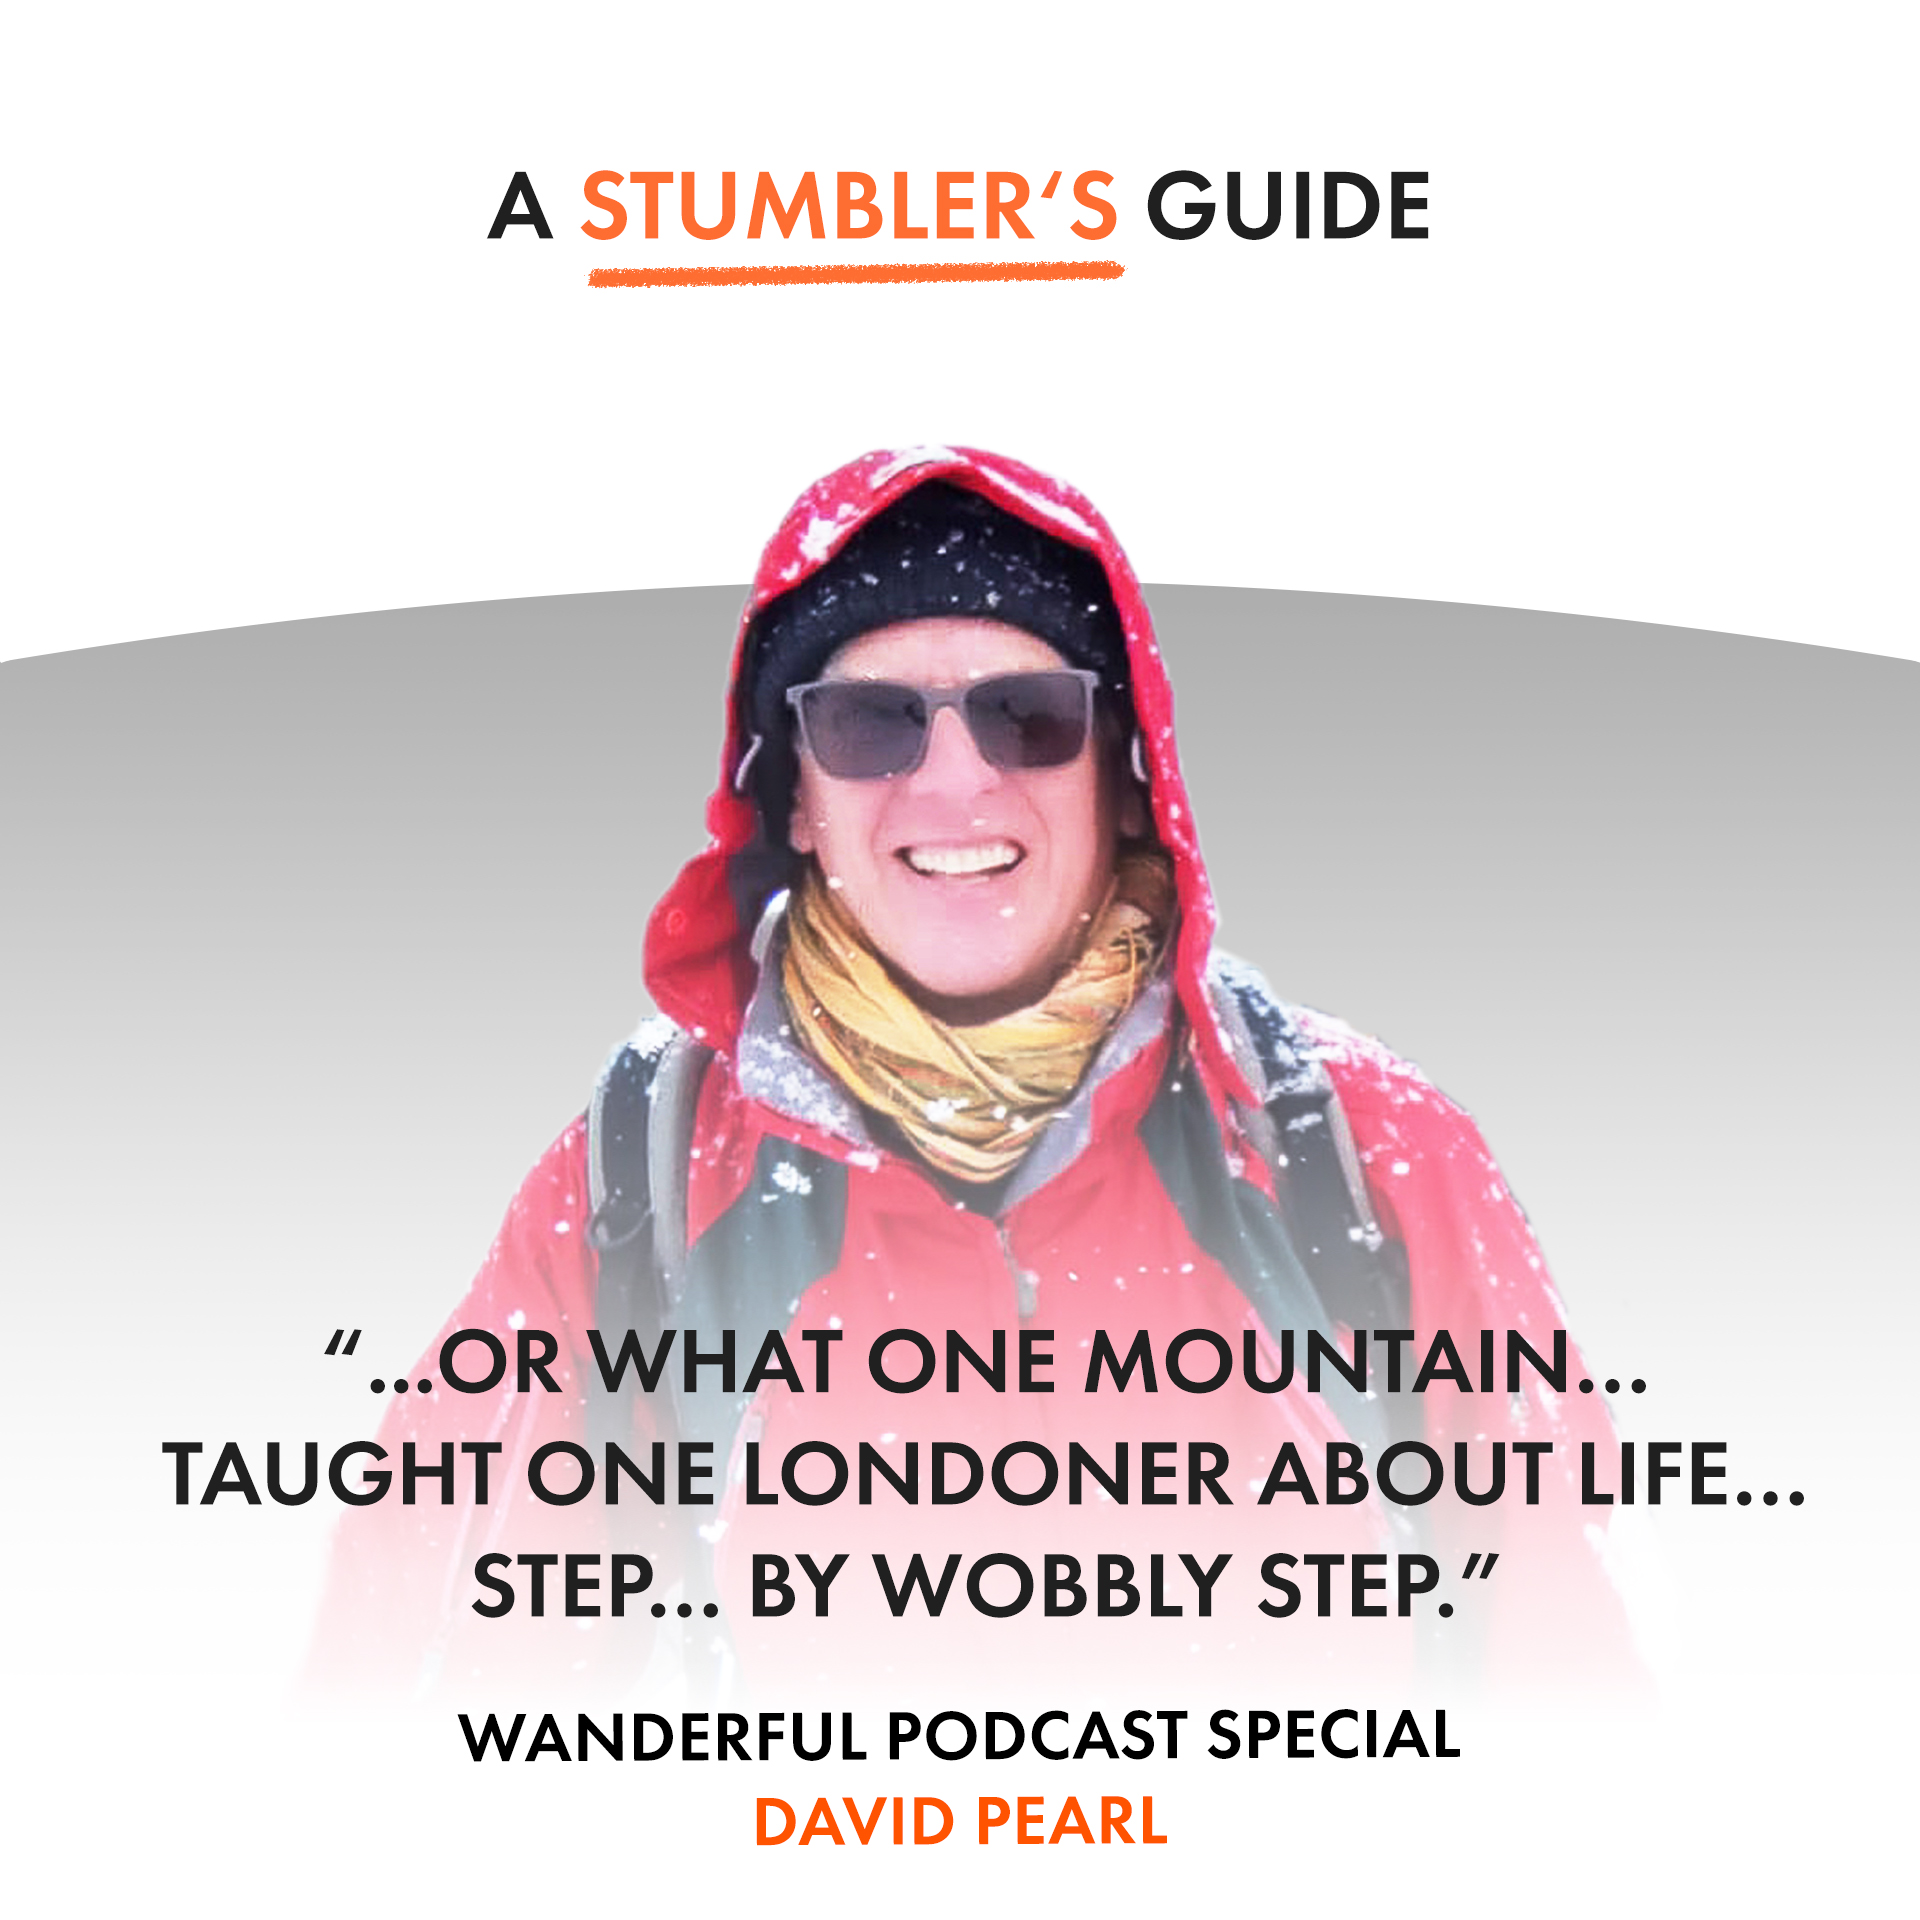 The Stumbler’s Guide: The Wanderful Podcast with David Pearl